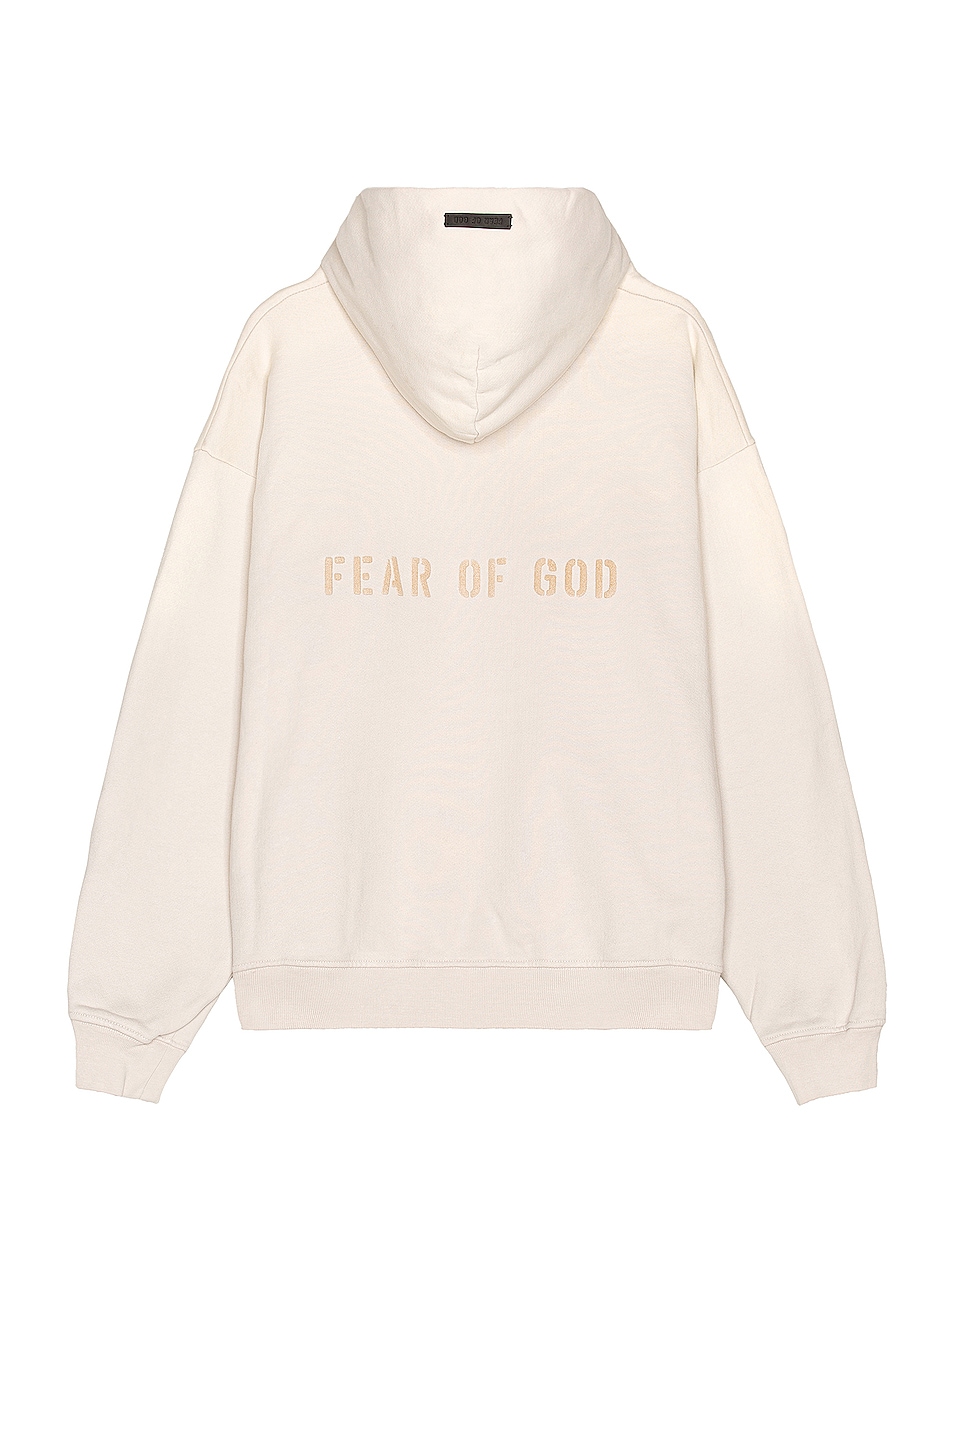 Image 1 of Fear of God FG Hoodie in Vintage Concrete White